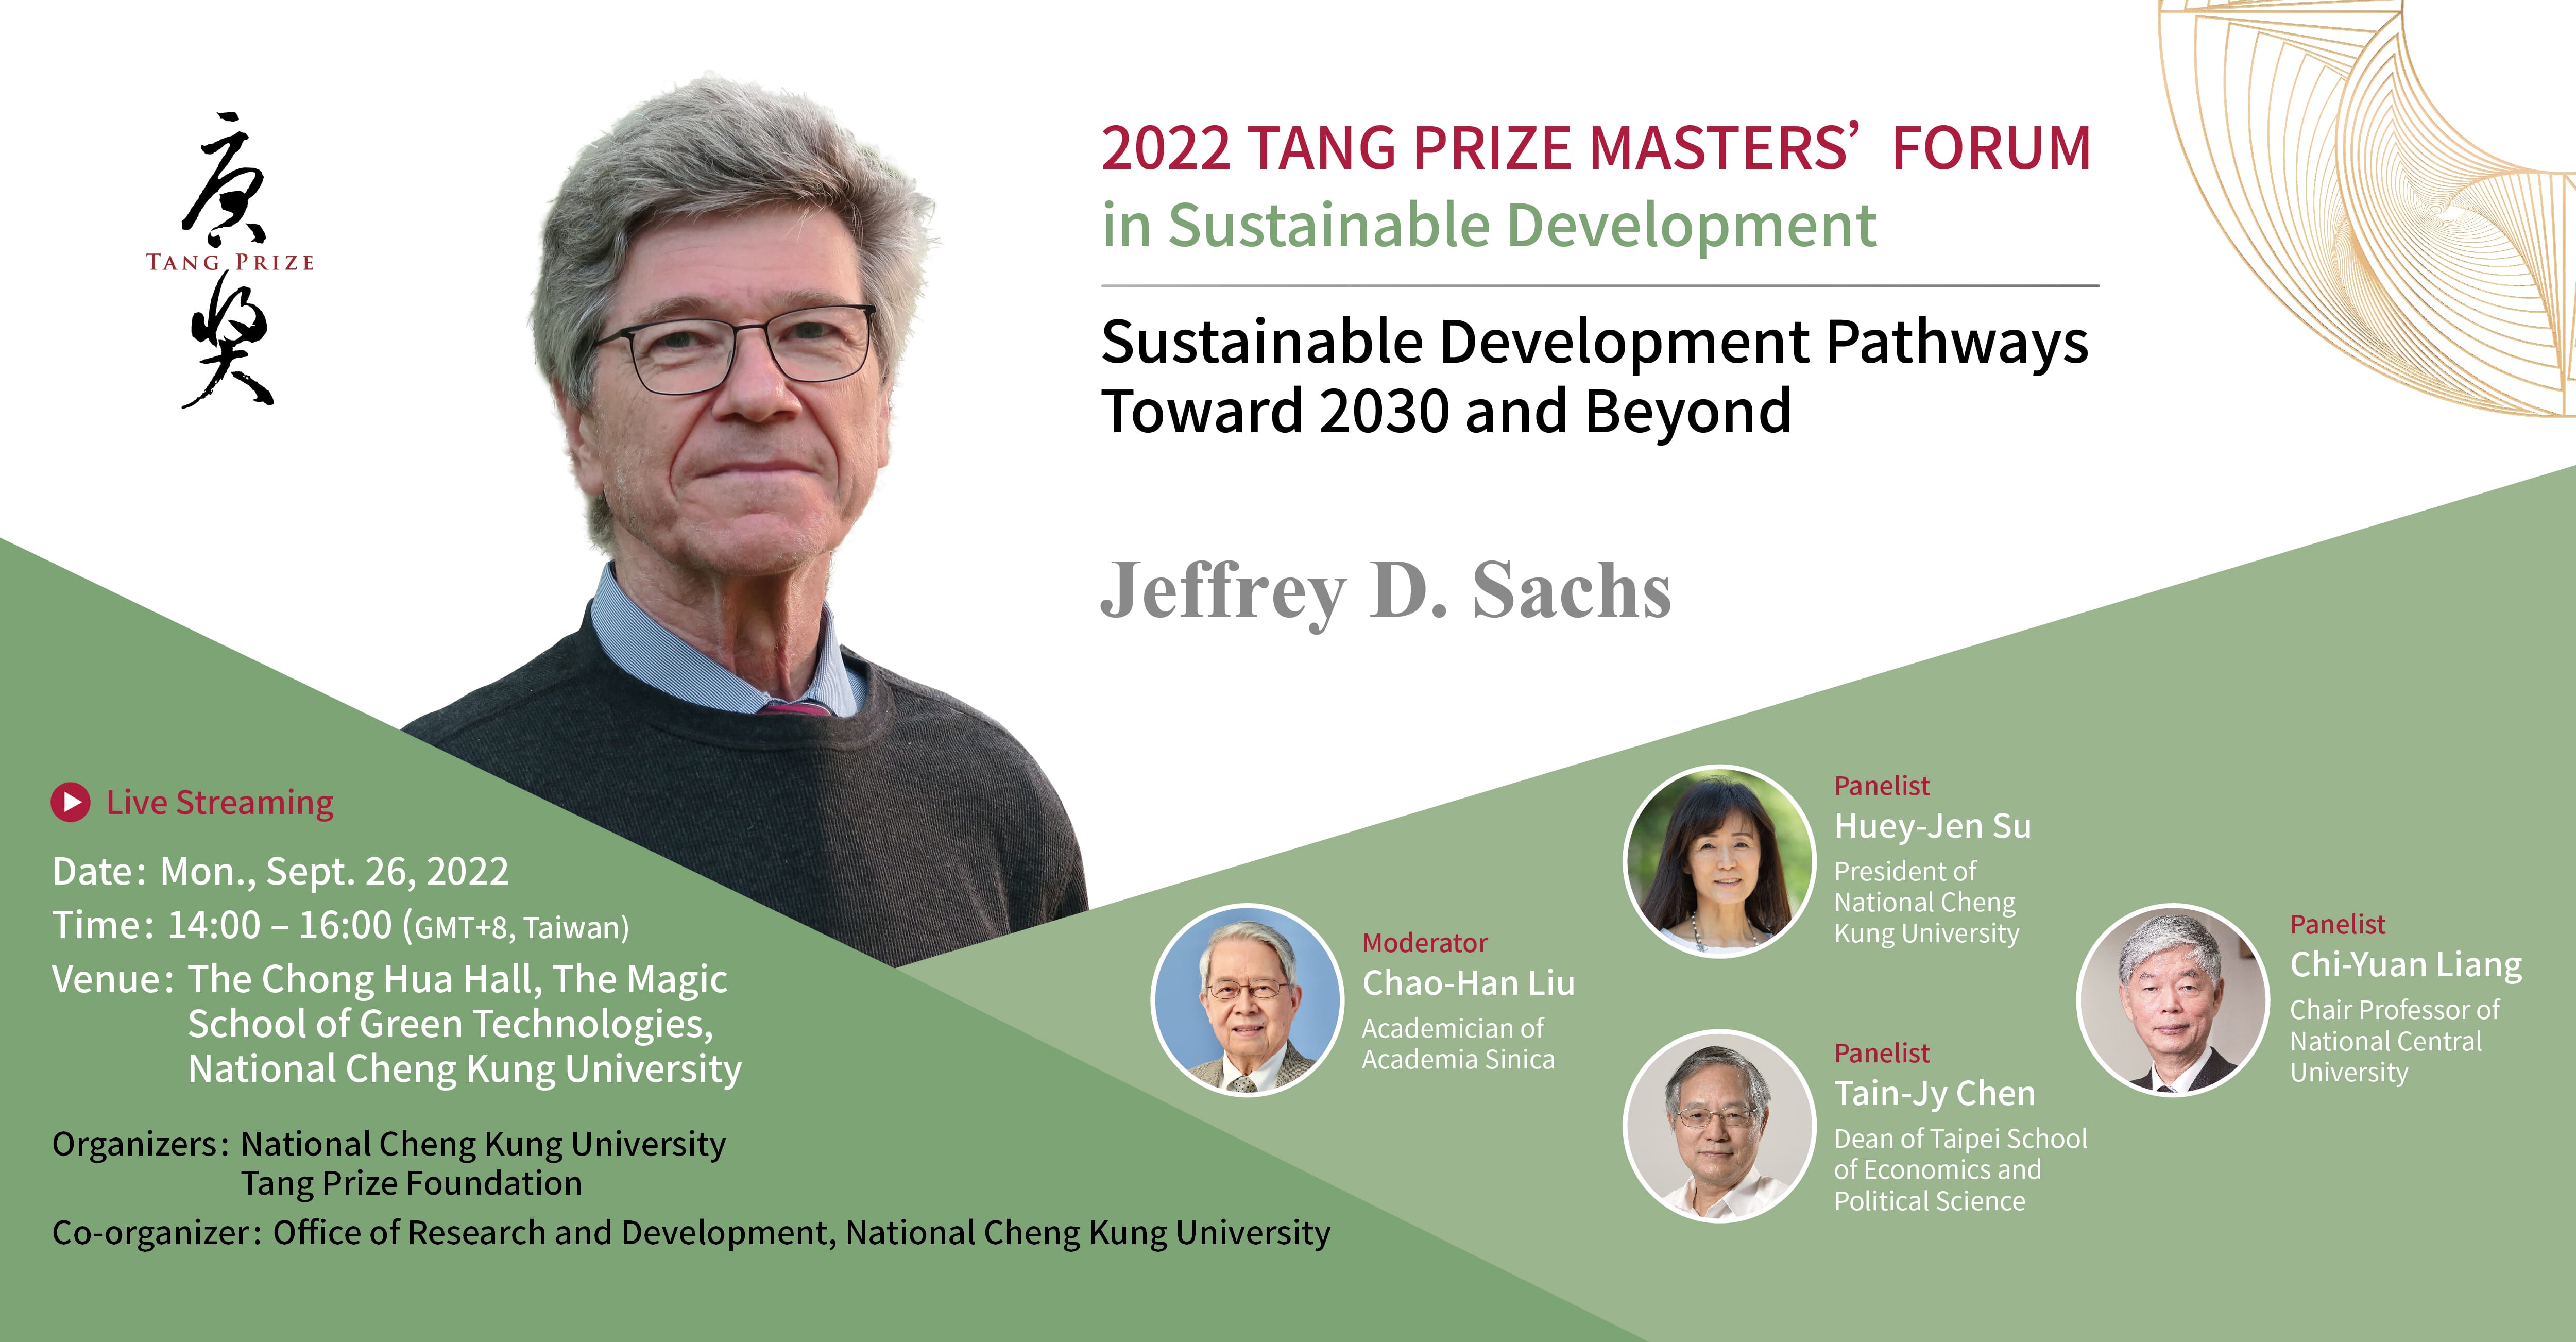 WB_2022 Tang Prize Masters' Forum Series - SD